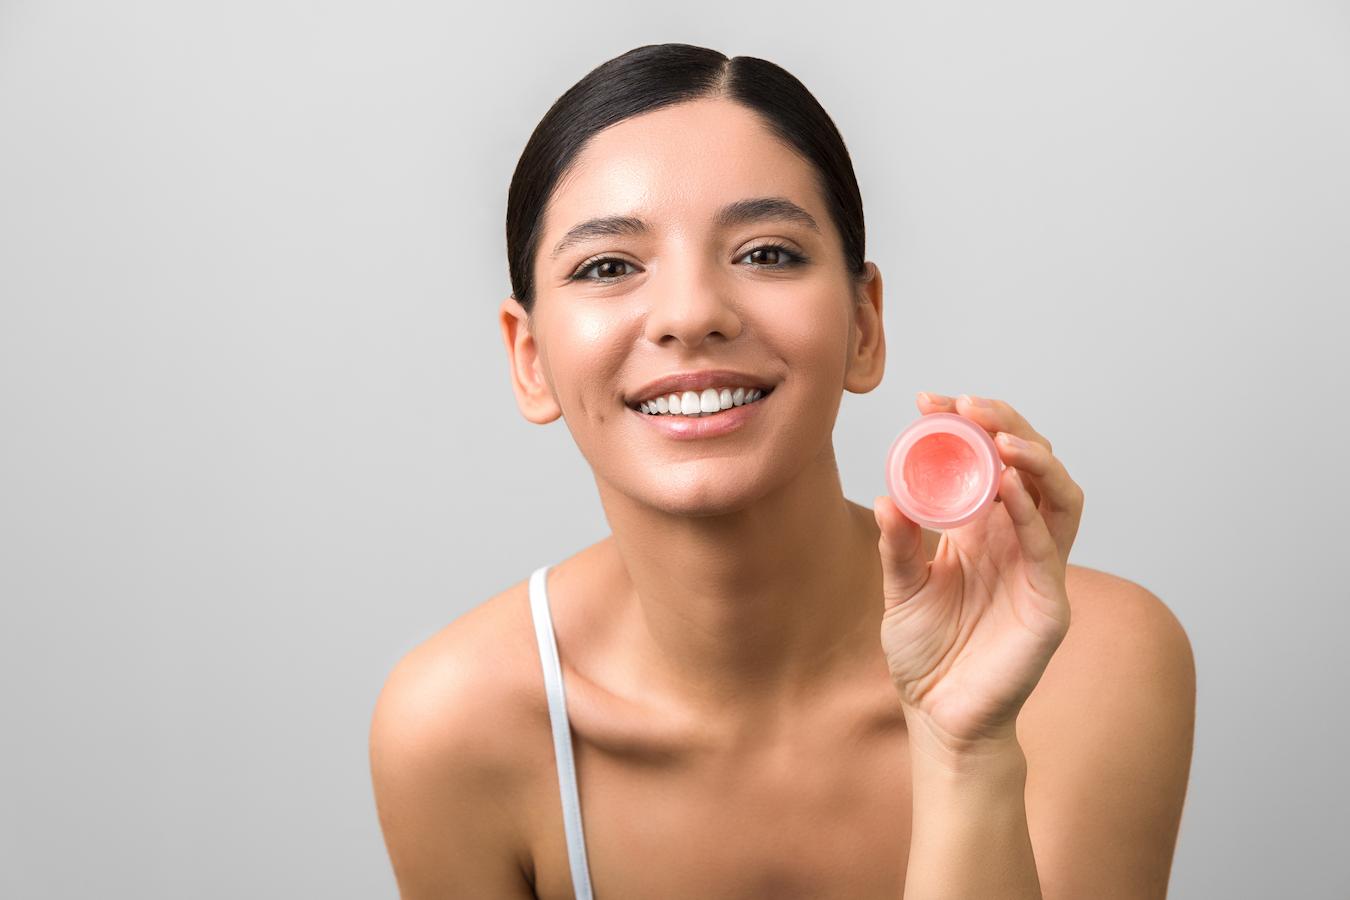 If you have chapped lips with dry patches try using natural lip balms